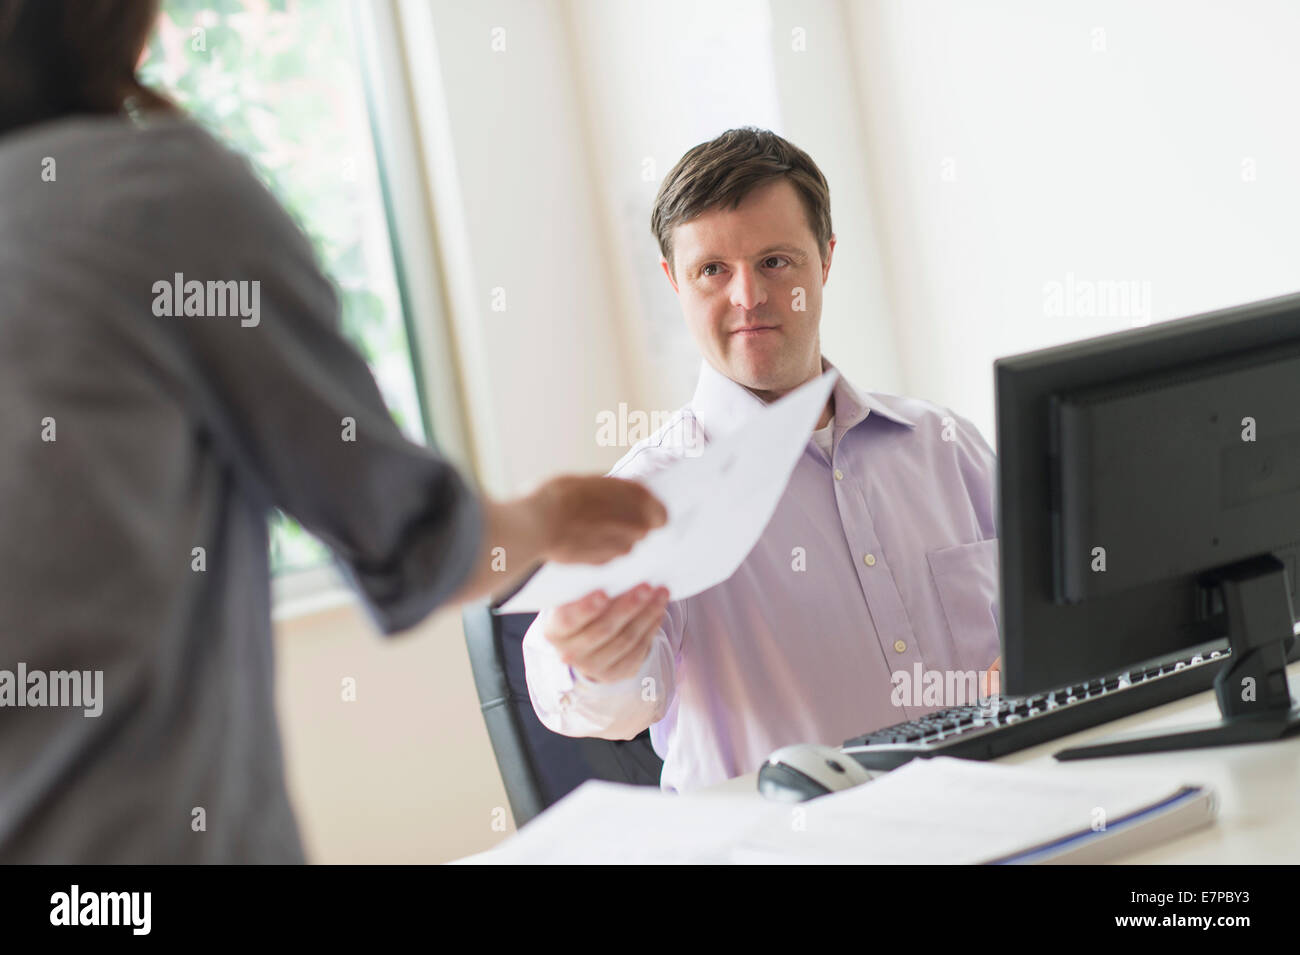 Man with down syndrome working in office Stock Photo